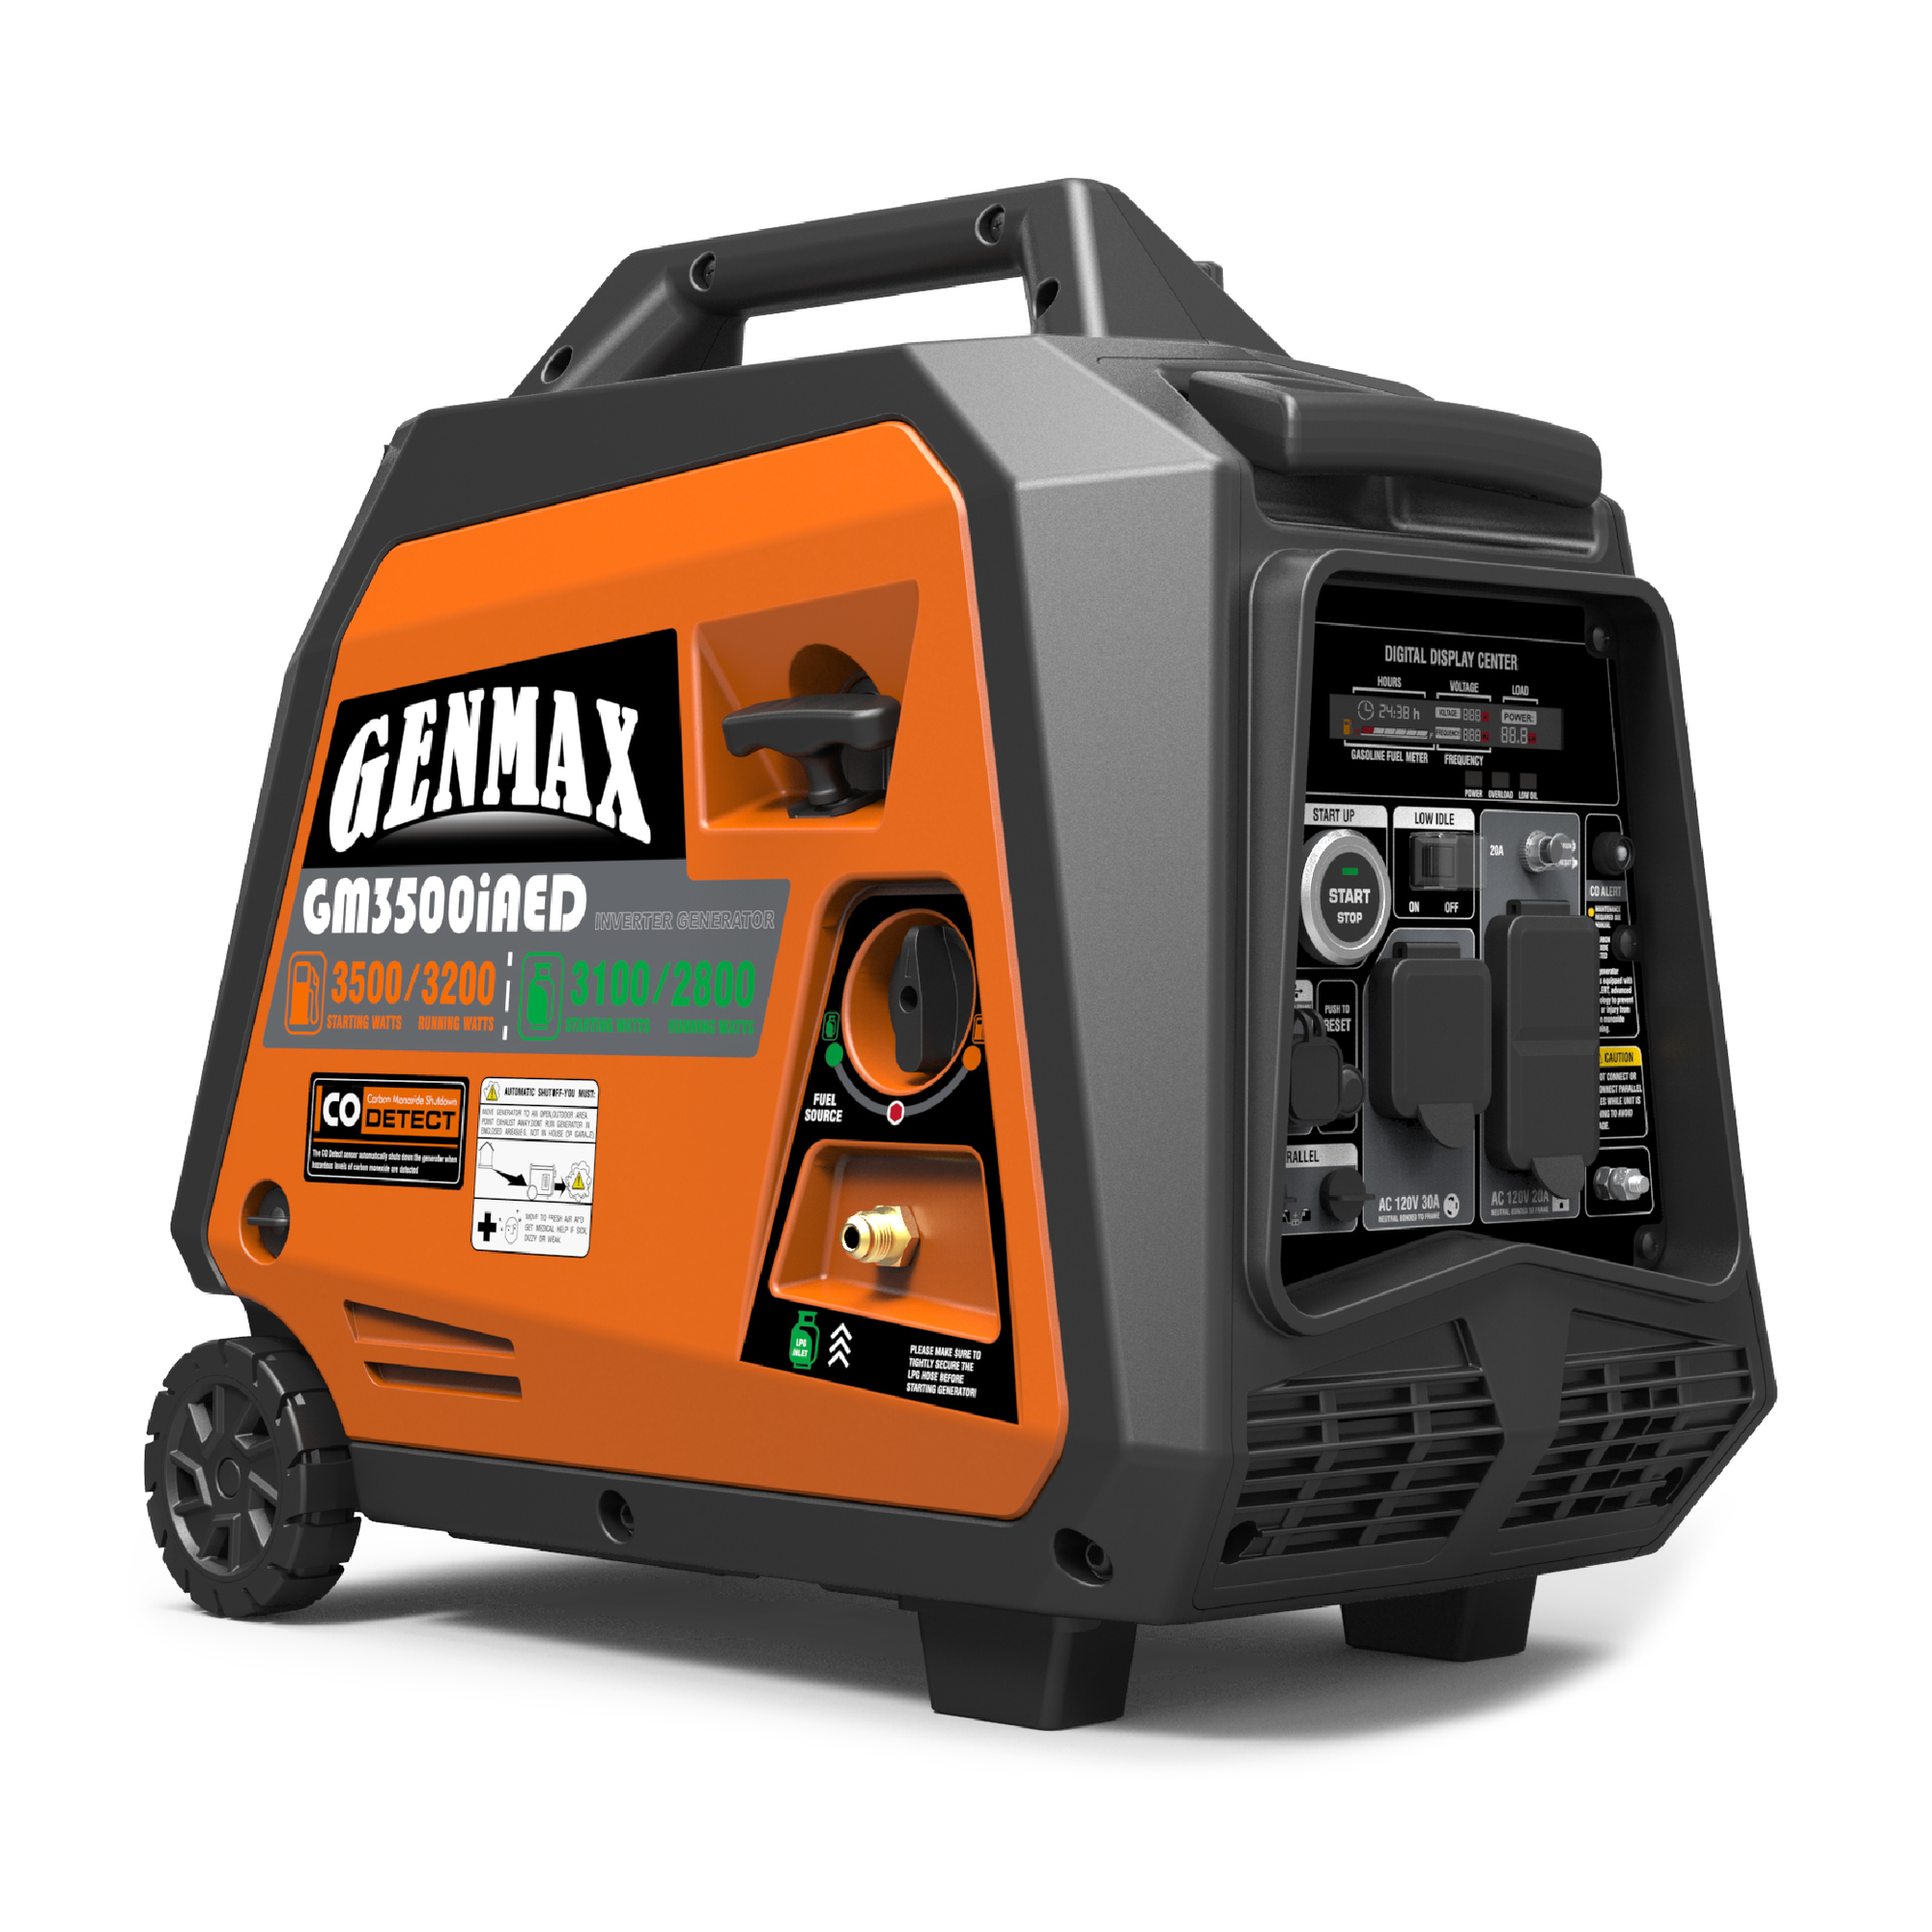 GENMAX, Portable Inverter Generator, 3500W Dual Fuel, Surge Watts 3500 Rated Watts 3200 Voltage 120 Model GM3500iAED